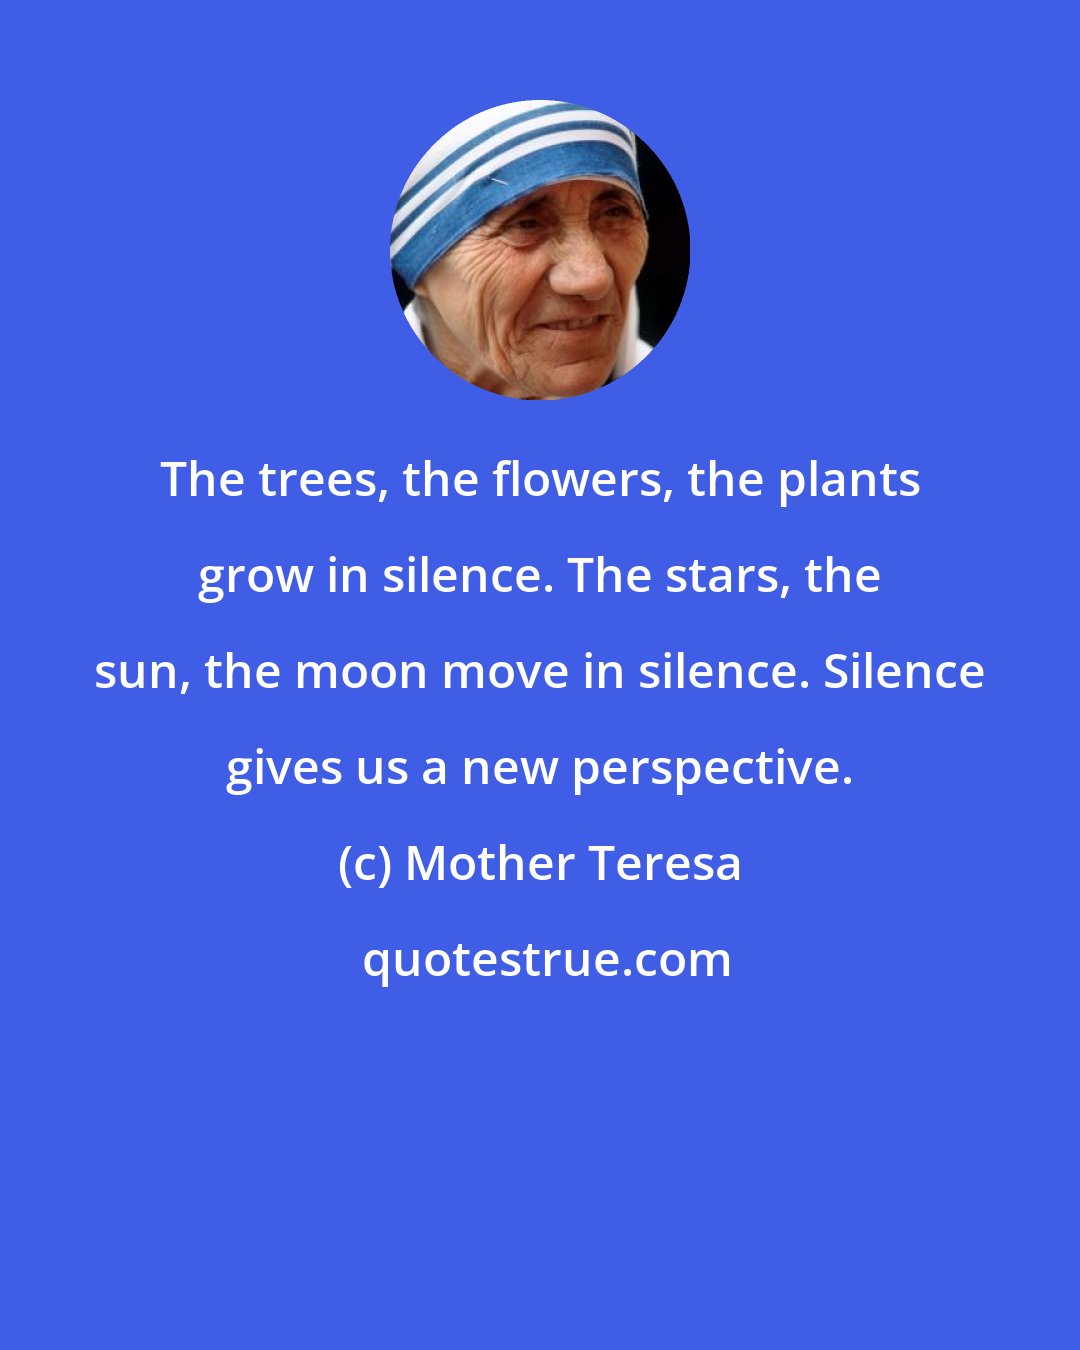 Mother Teresa: The trees, the flowers, the plants grow in silence. The stars, the sun, the moon move in silence. Silence gives us a new perspective.